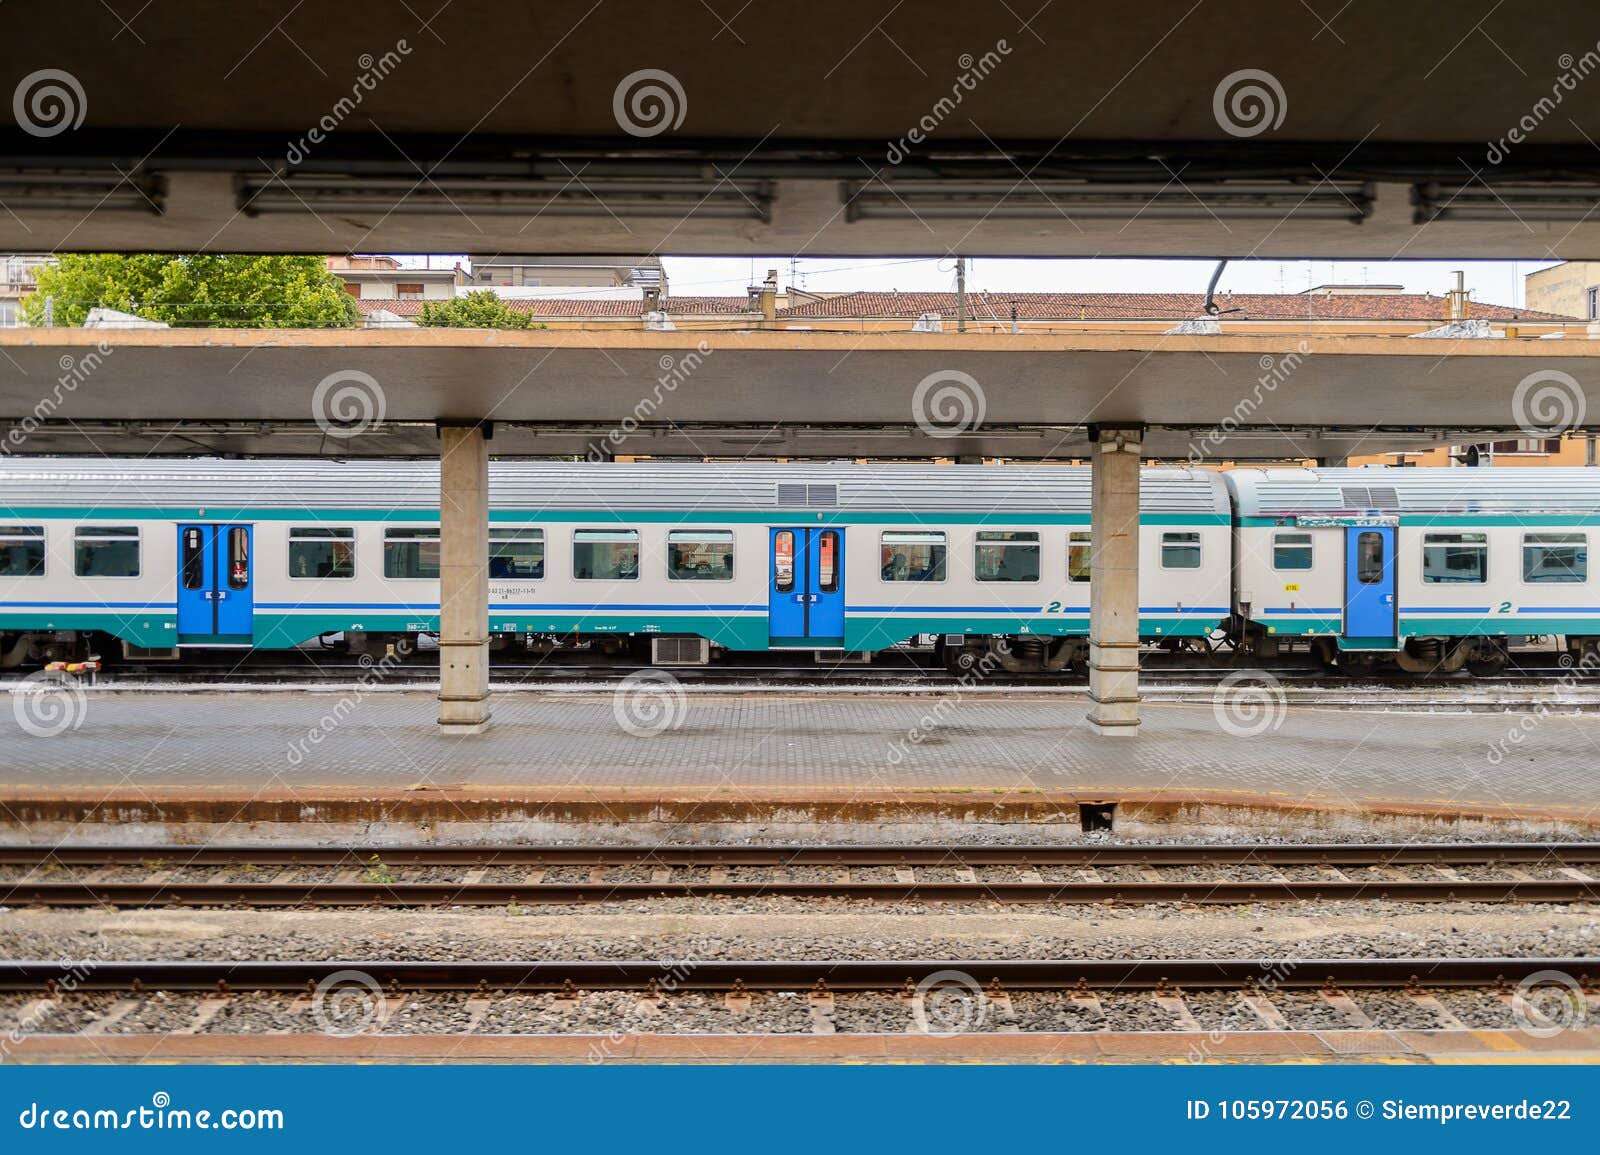 Railway Station In Florence Editorial Photo - Image of railway, railcar